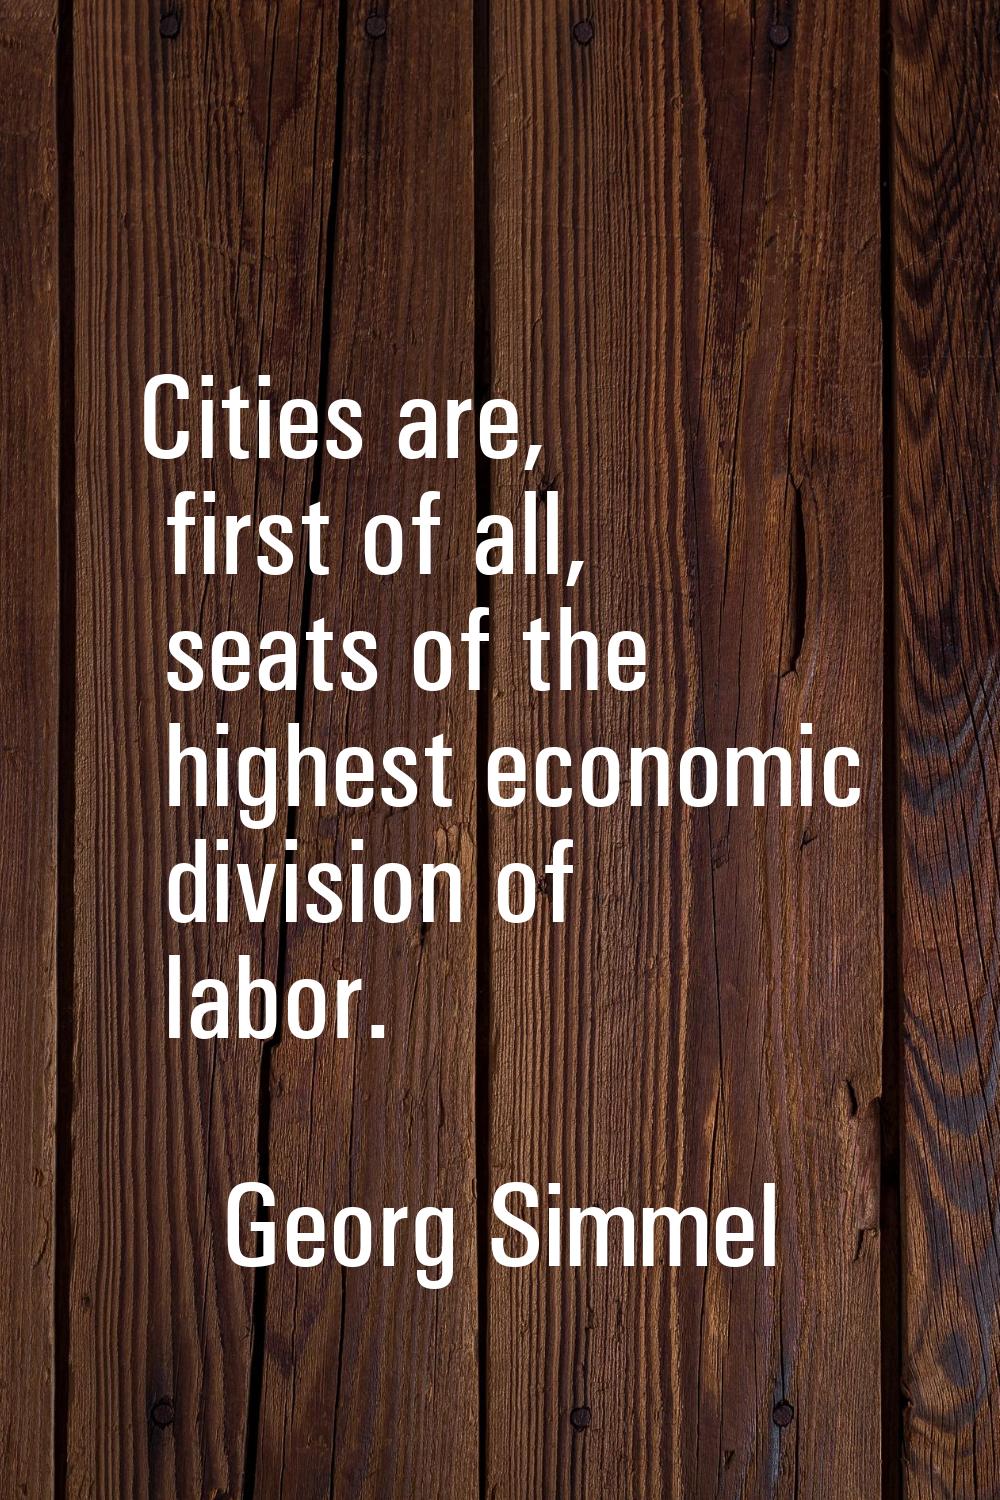 Cities are, first of all, seats of the highest economic division of labor.